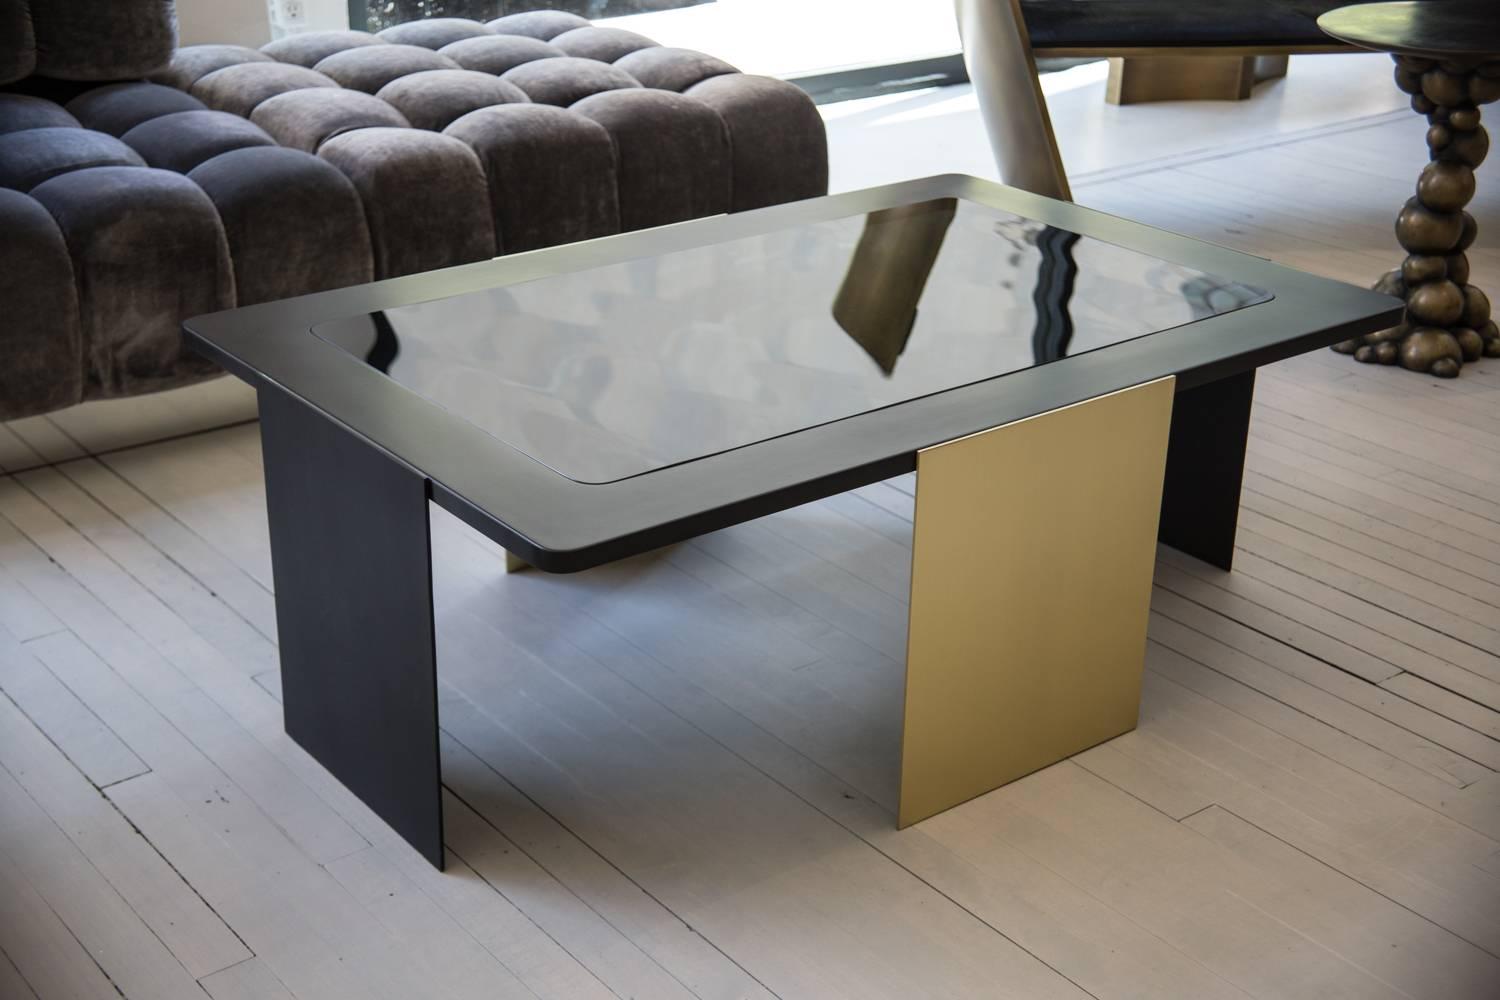 ULTIMO blackened metal coffee table, is composed of two 3/8